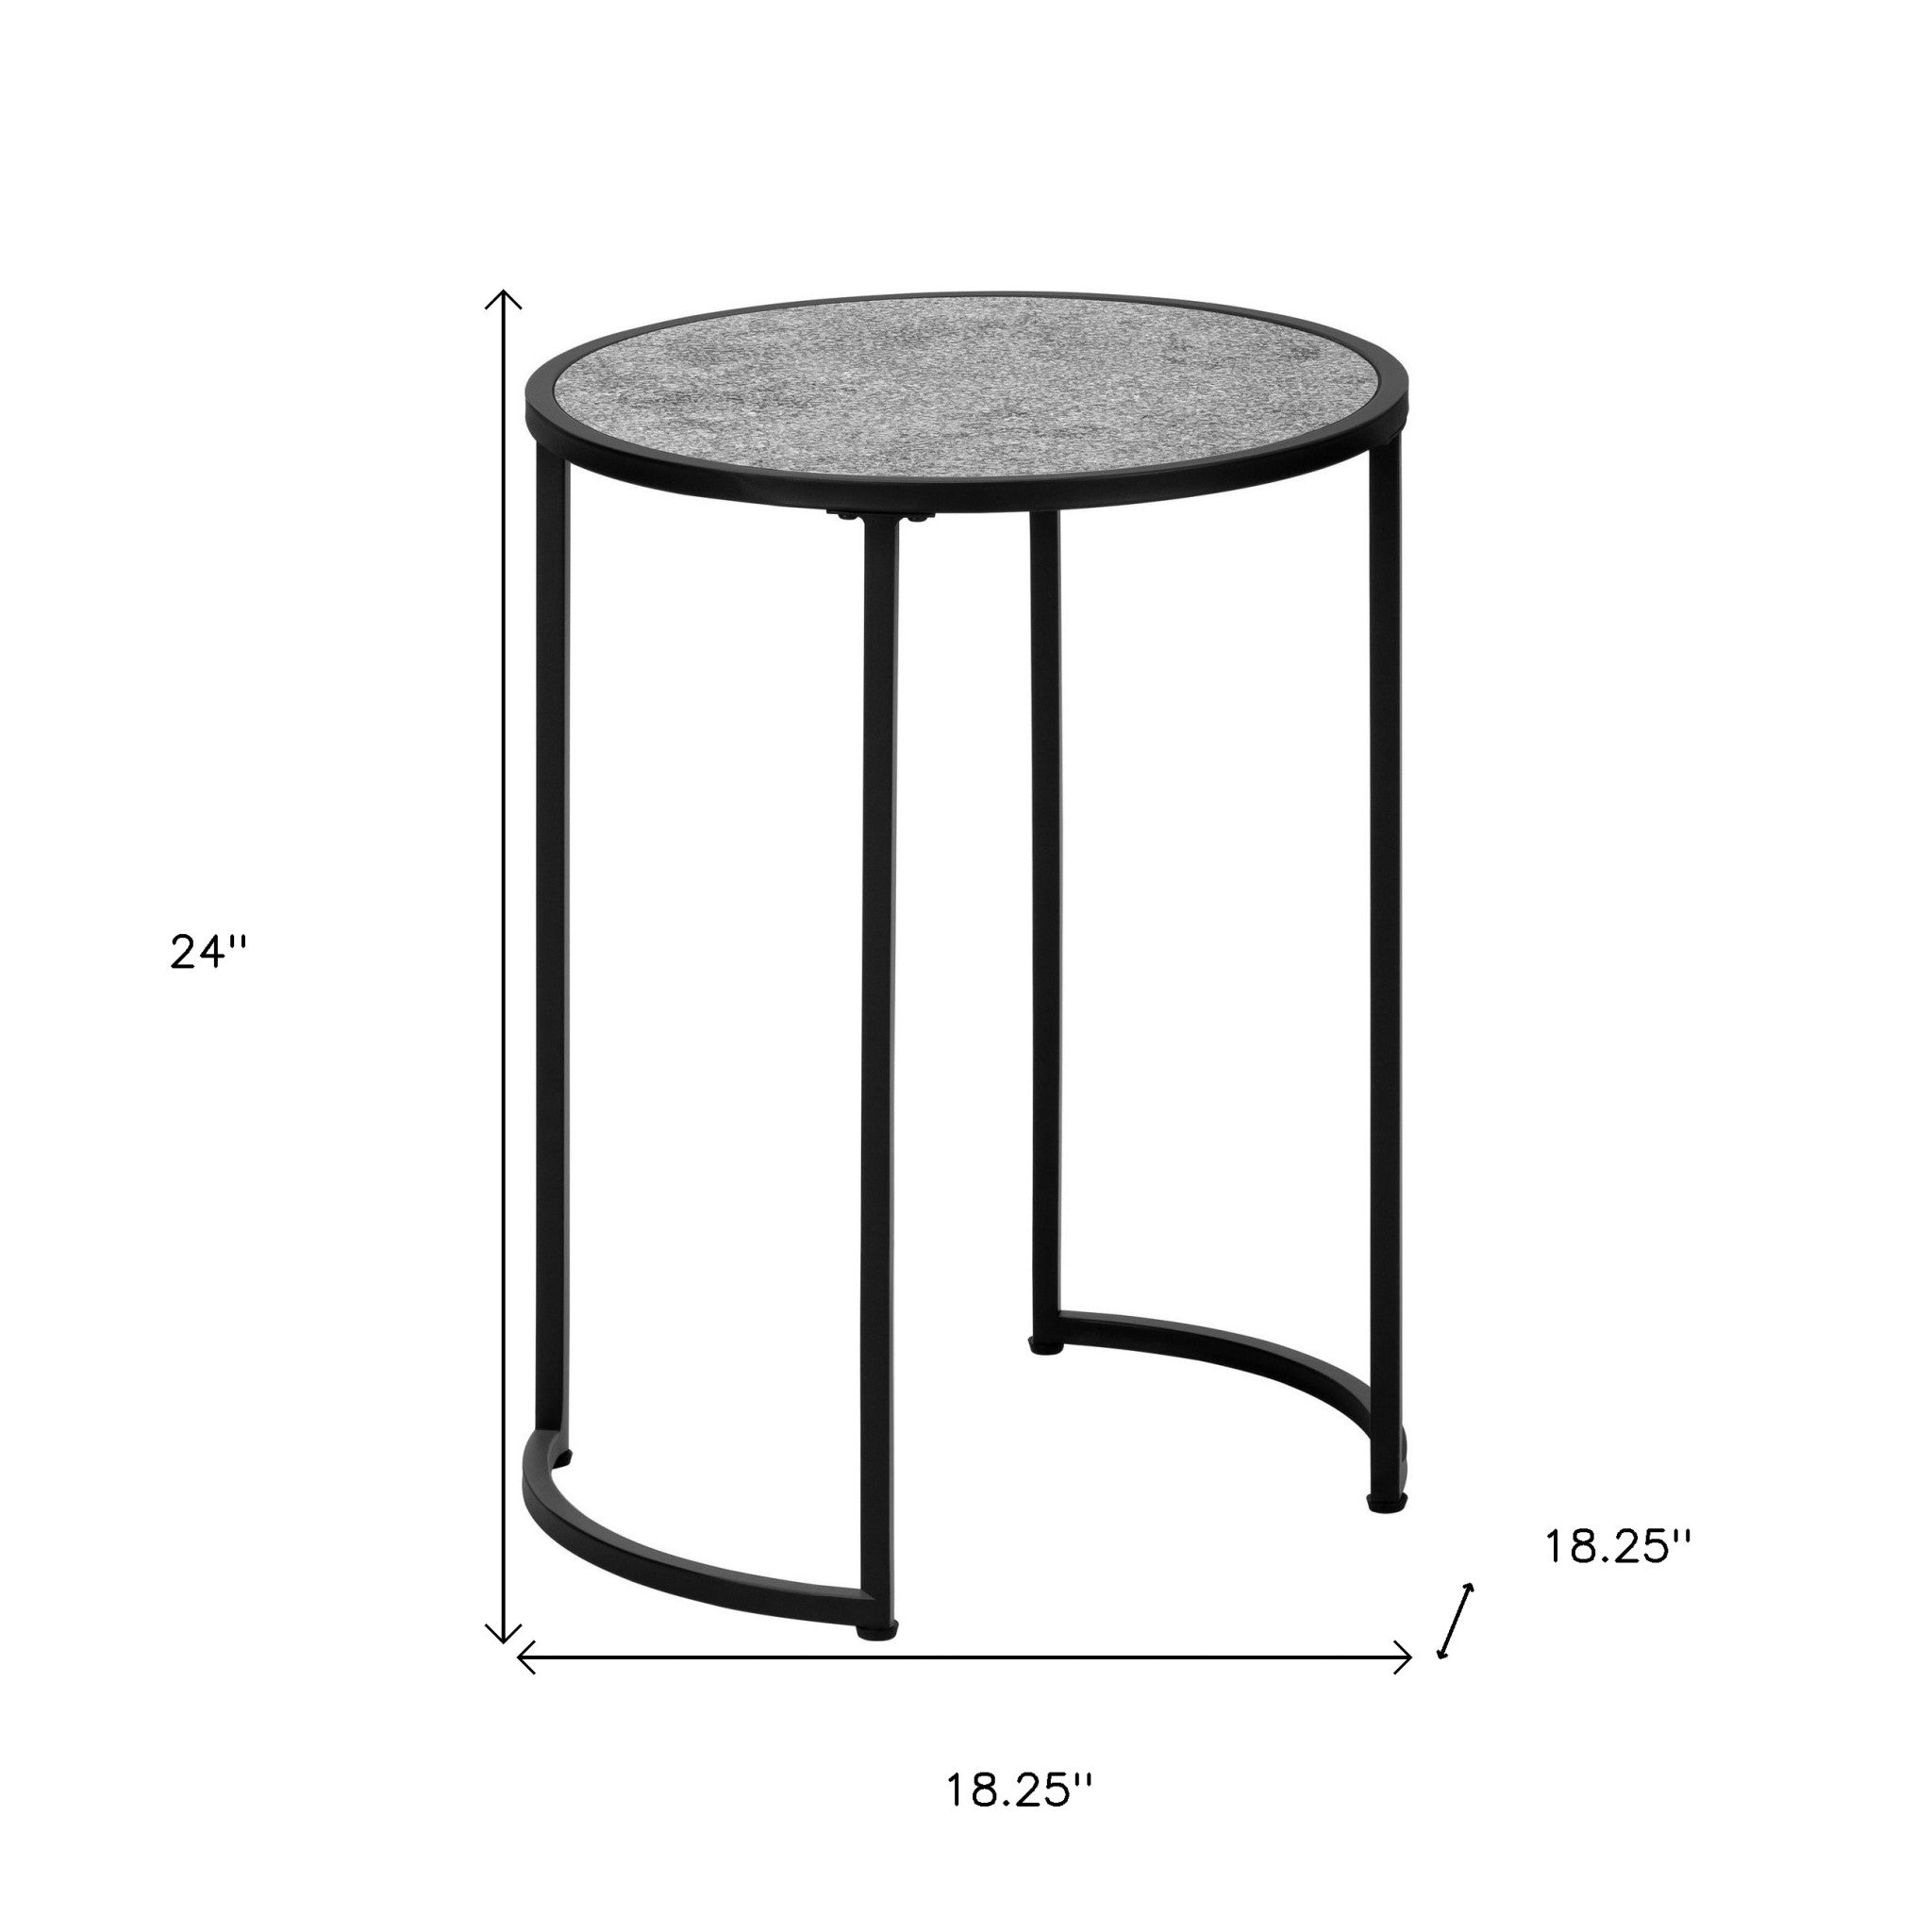 24" Black And Gray Round End Table